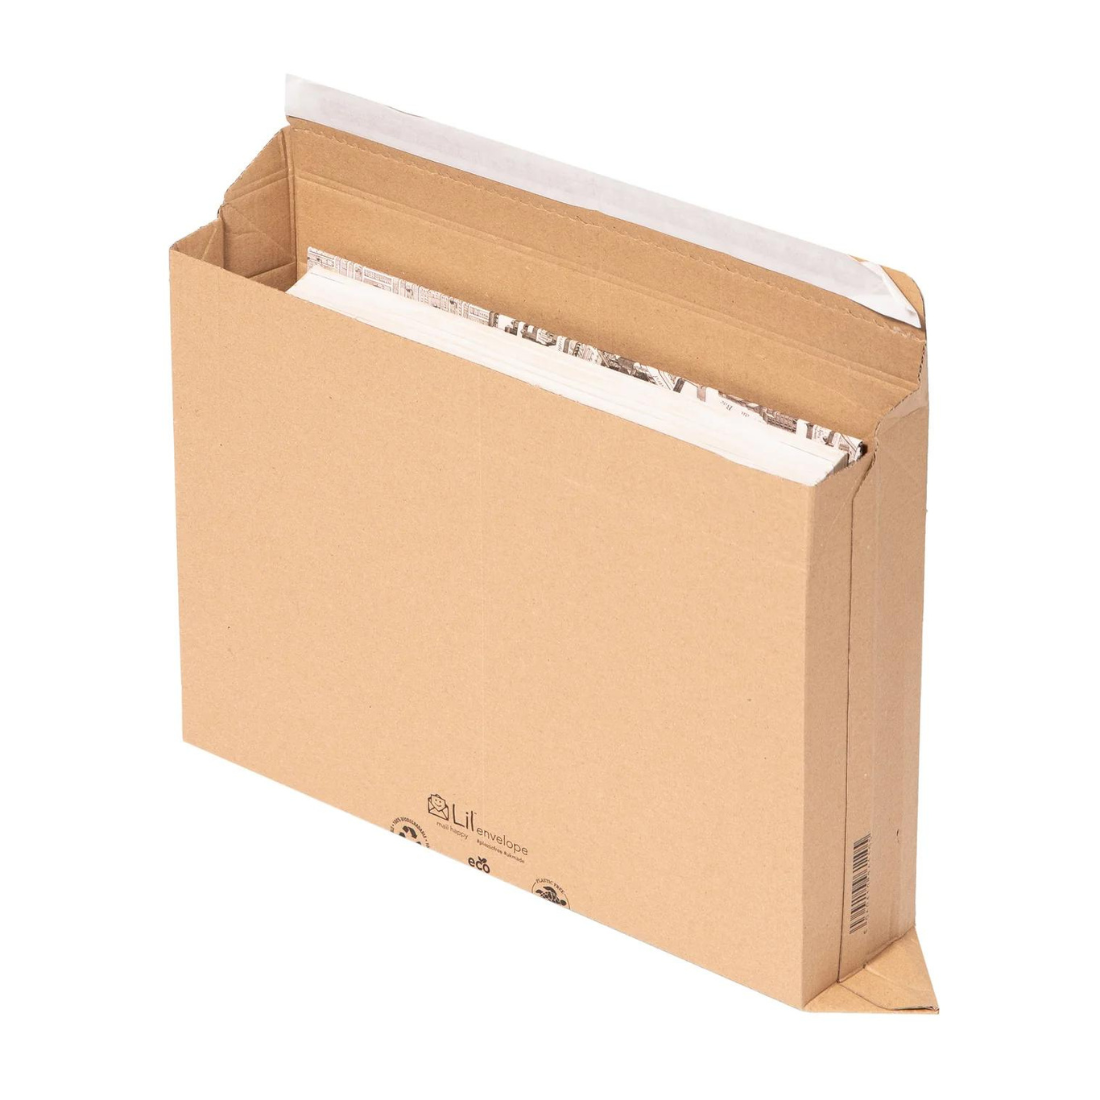 Cardboard Envelopes 400 x 278 mm (A4) - Perfect for delivering clothing, big books, cook books, puzzles, paintings, arts & craft materials, posters, maps, calendars and lots of other big, flat items (PACK OF 50)